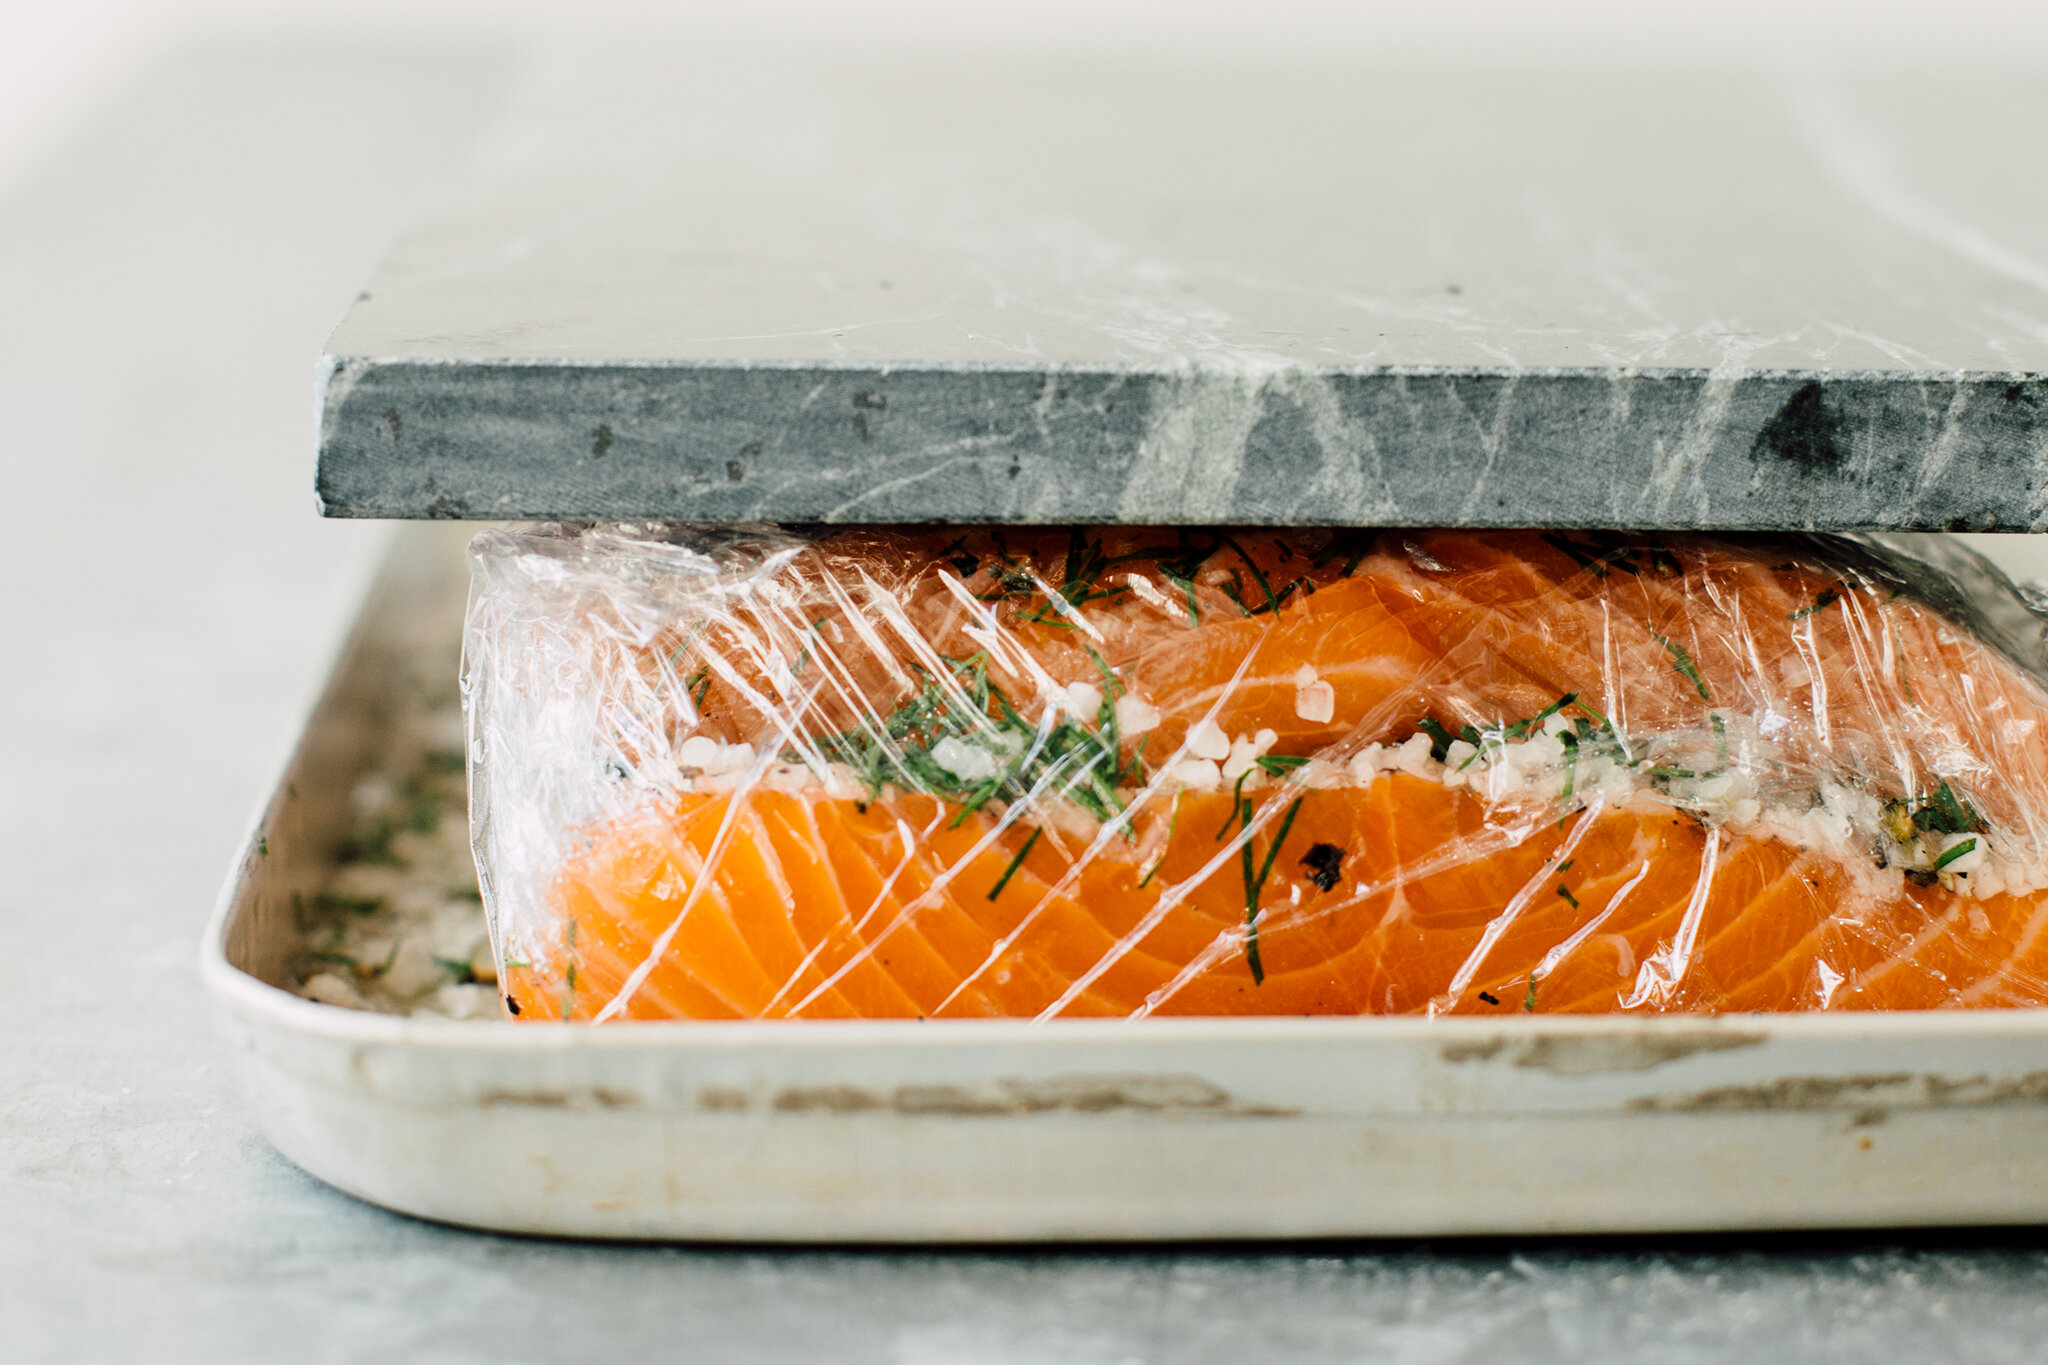 Eat well with Stiftung Warentest - Graved salmon